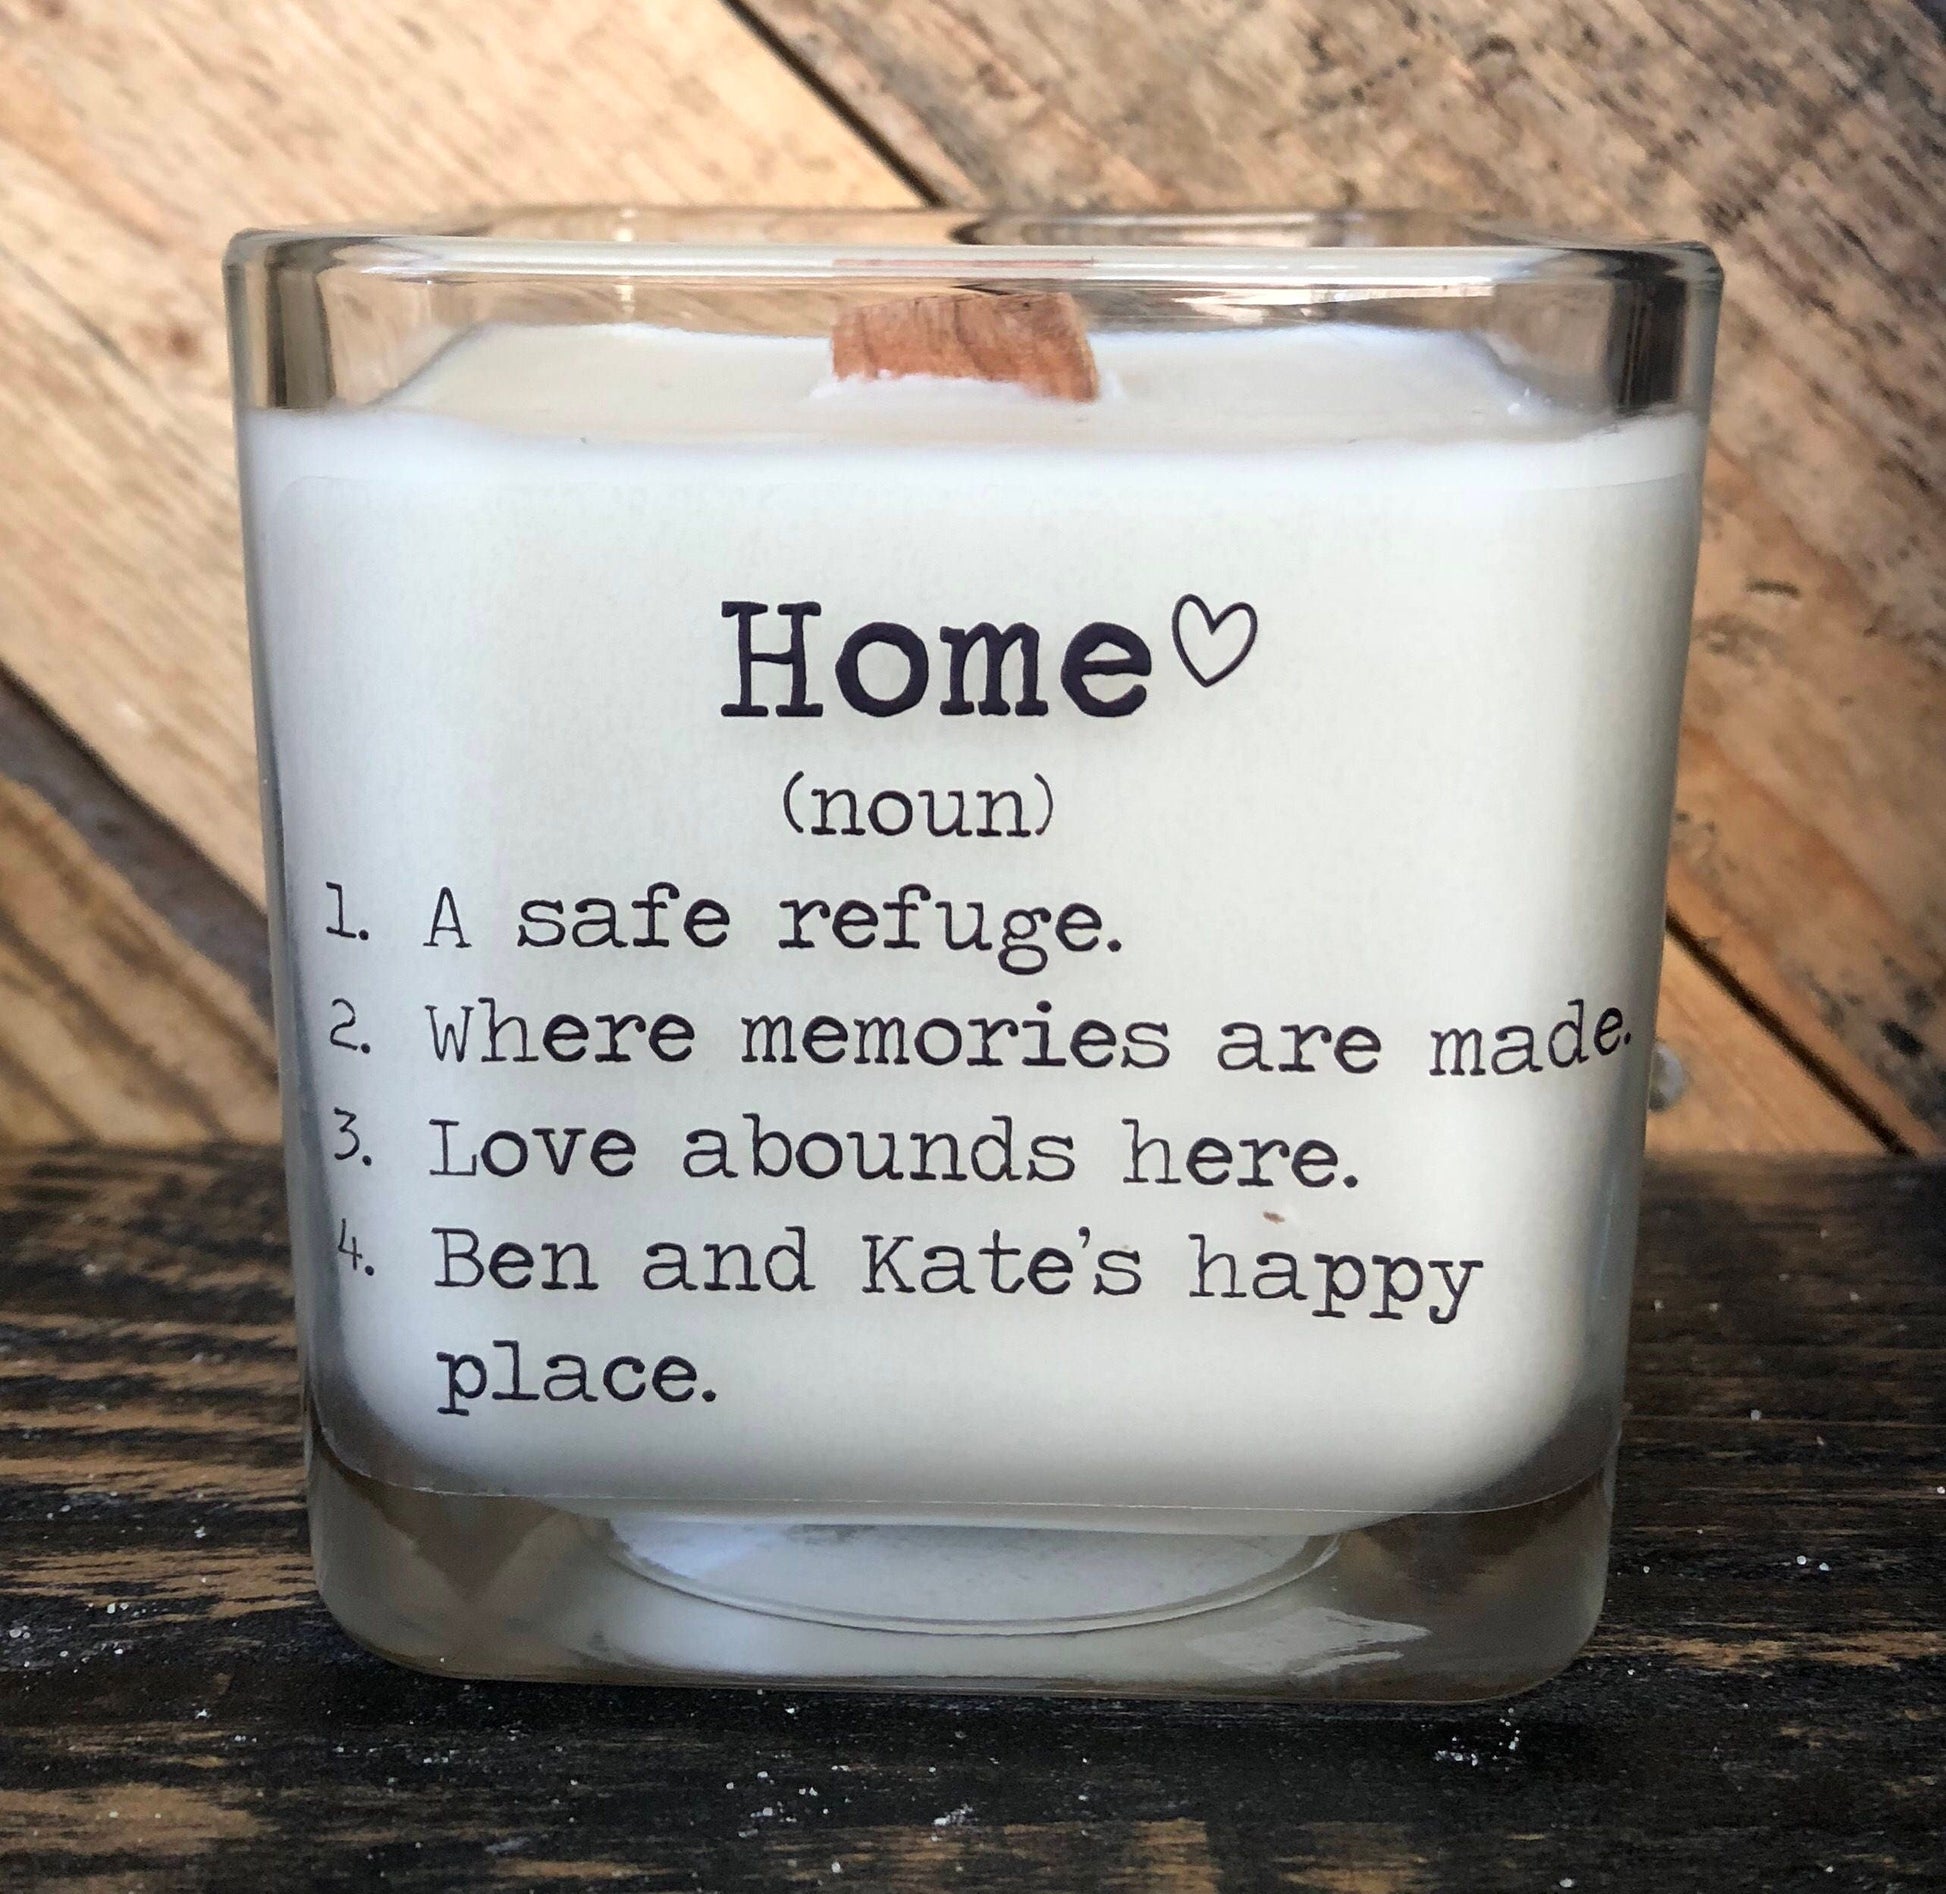  House Warming Gifts New Home -Housewarming Gifts for